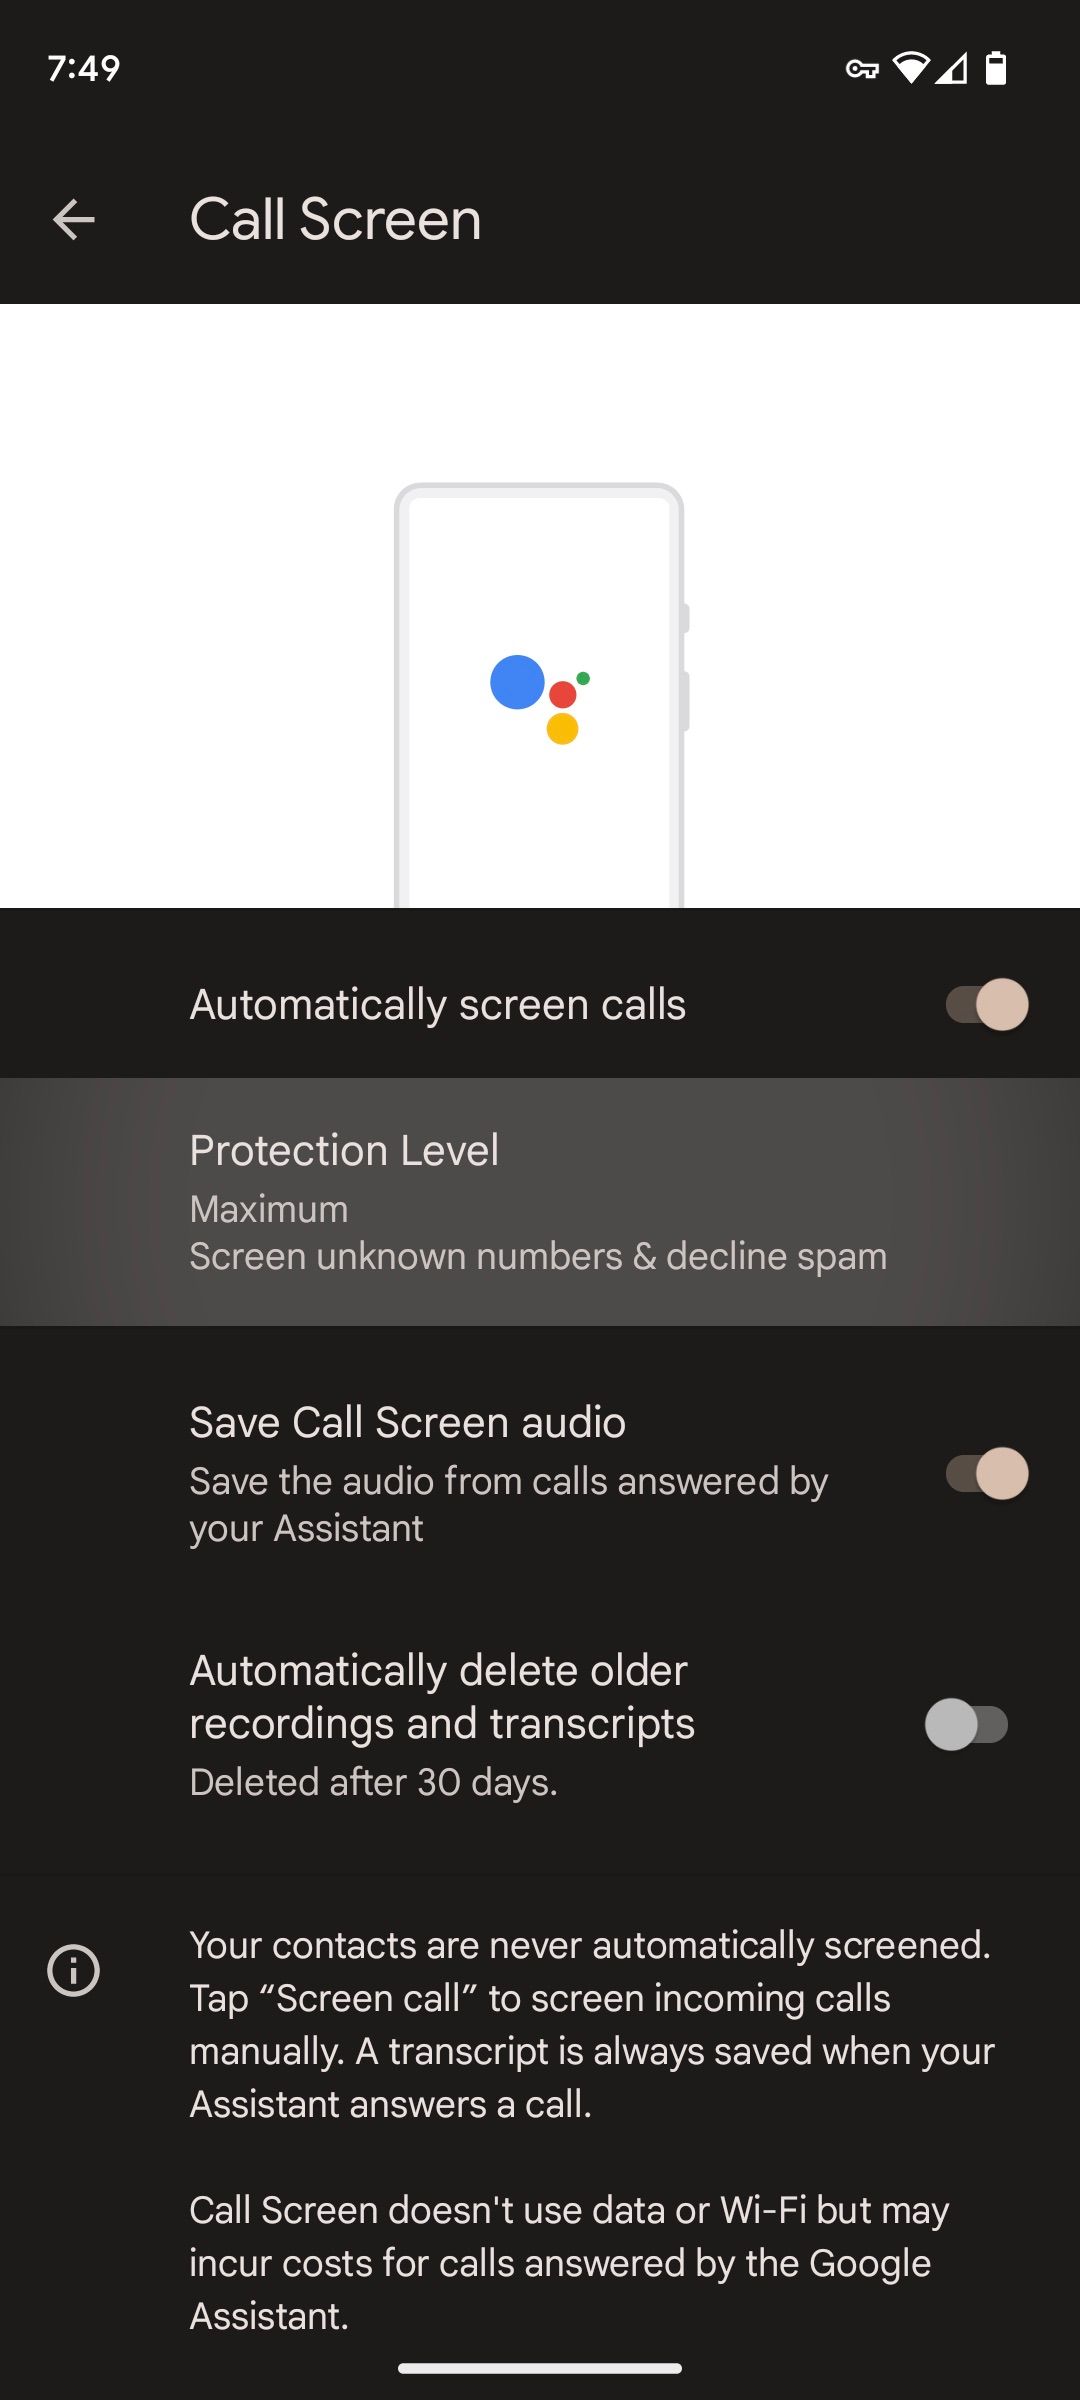 Google Pixel Protection Level menu for Call screen